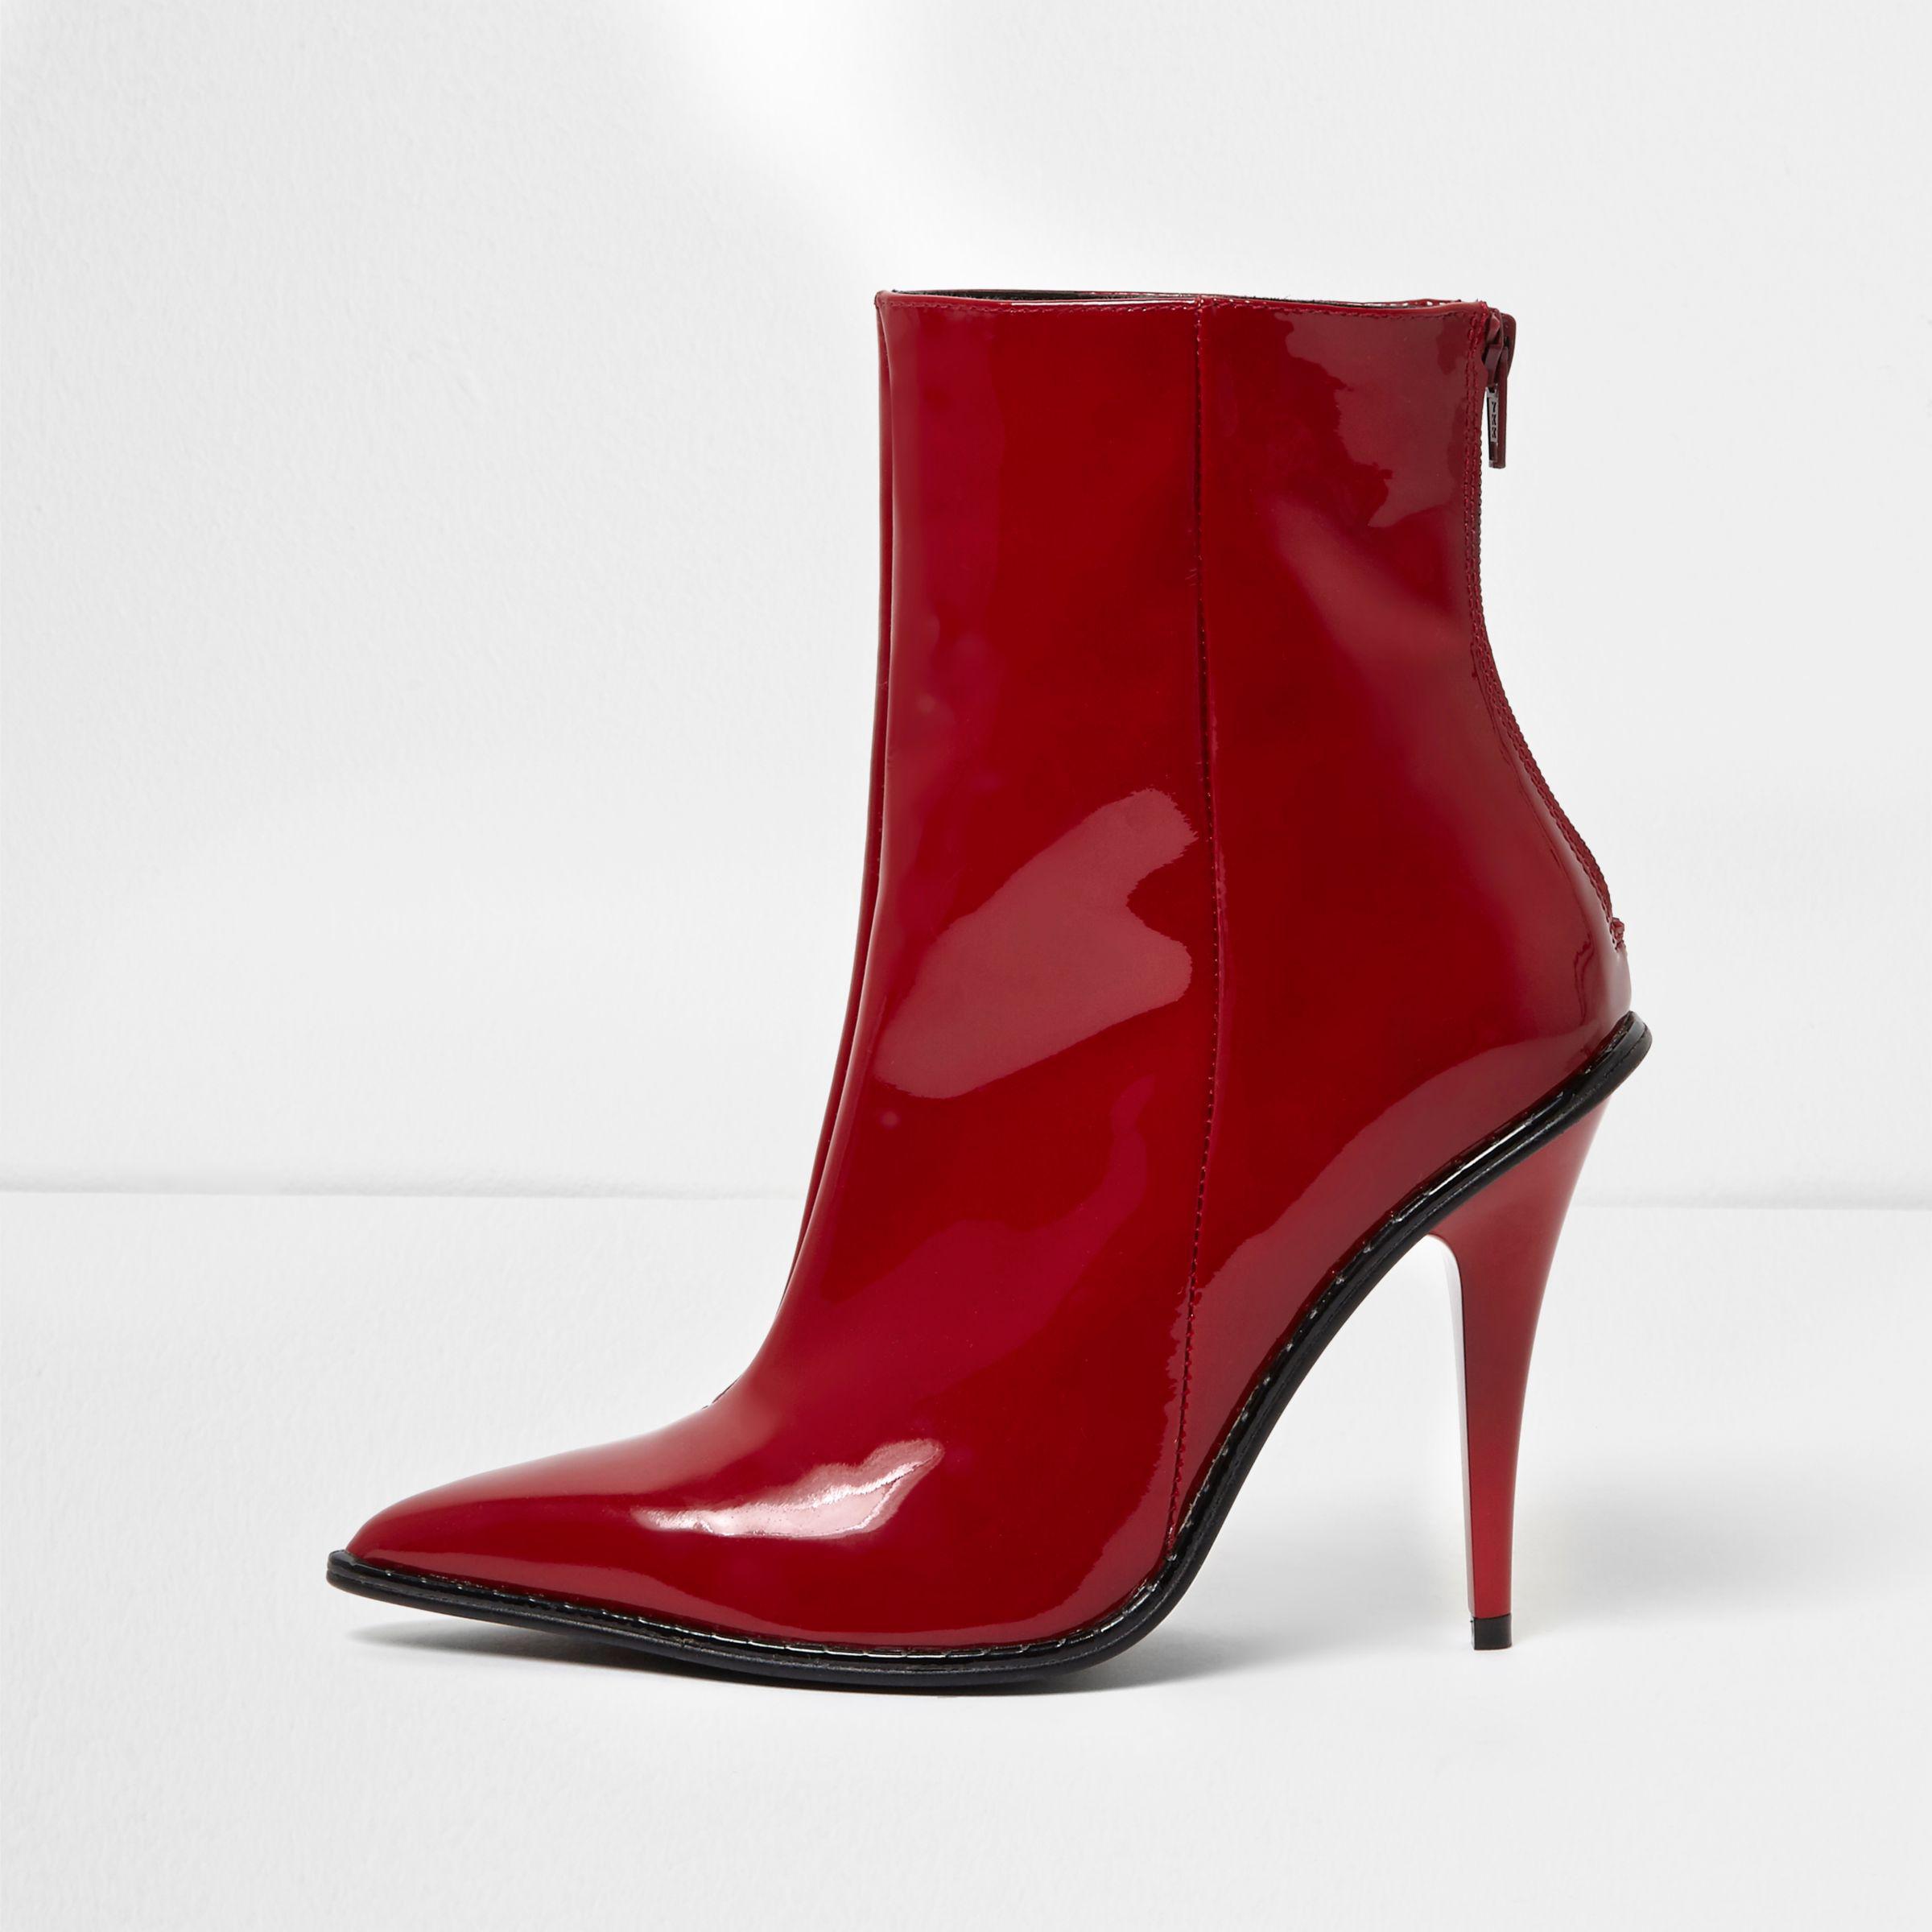 River Island Red Patent Stiletto Heel Ankle Boots - Lyst